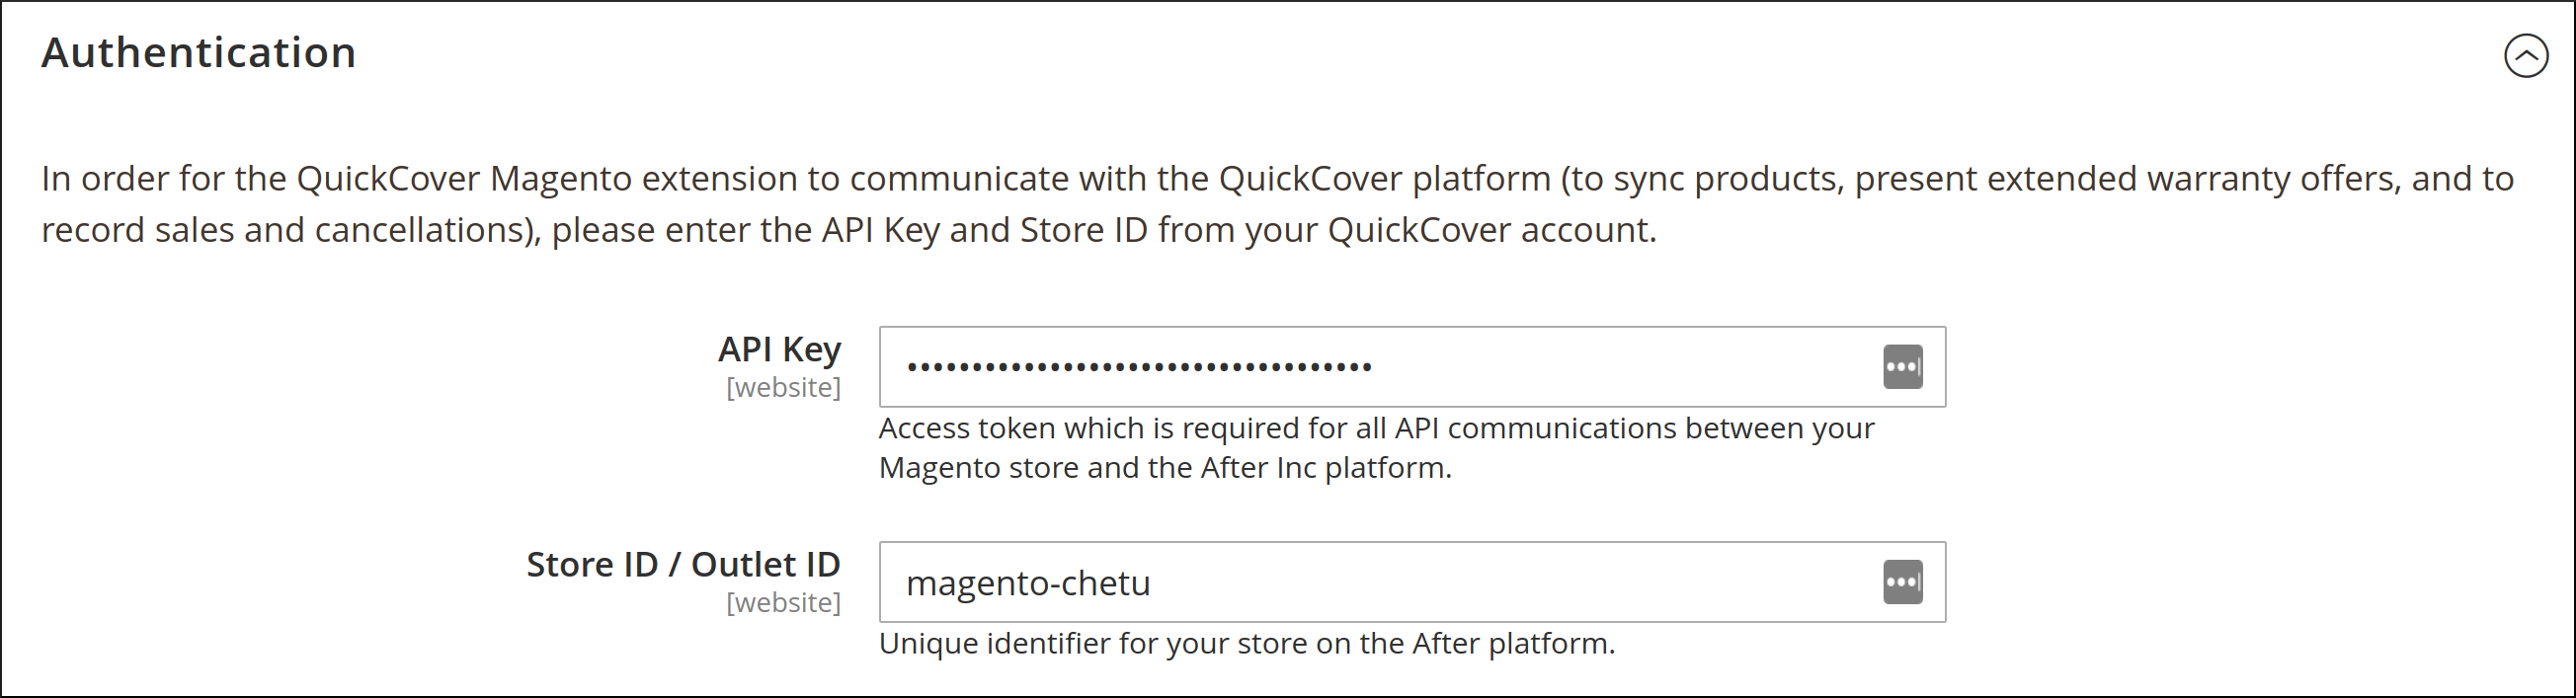 Screenshot of QuickCover configuration in Magento, showing options to enter authentication credentials'